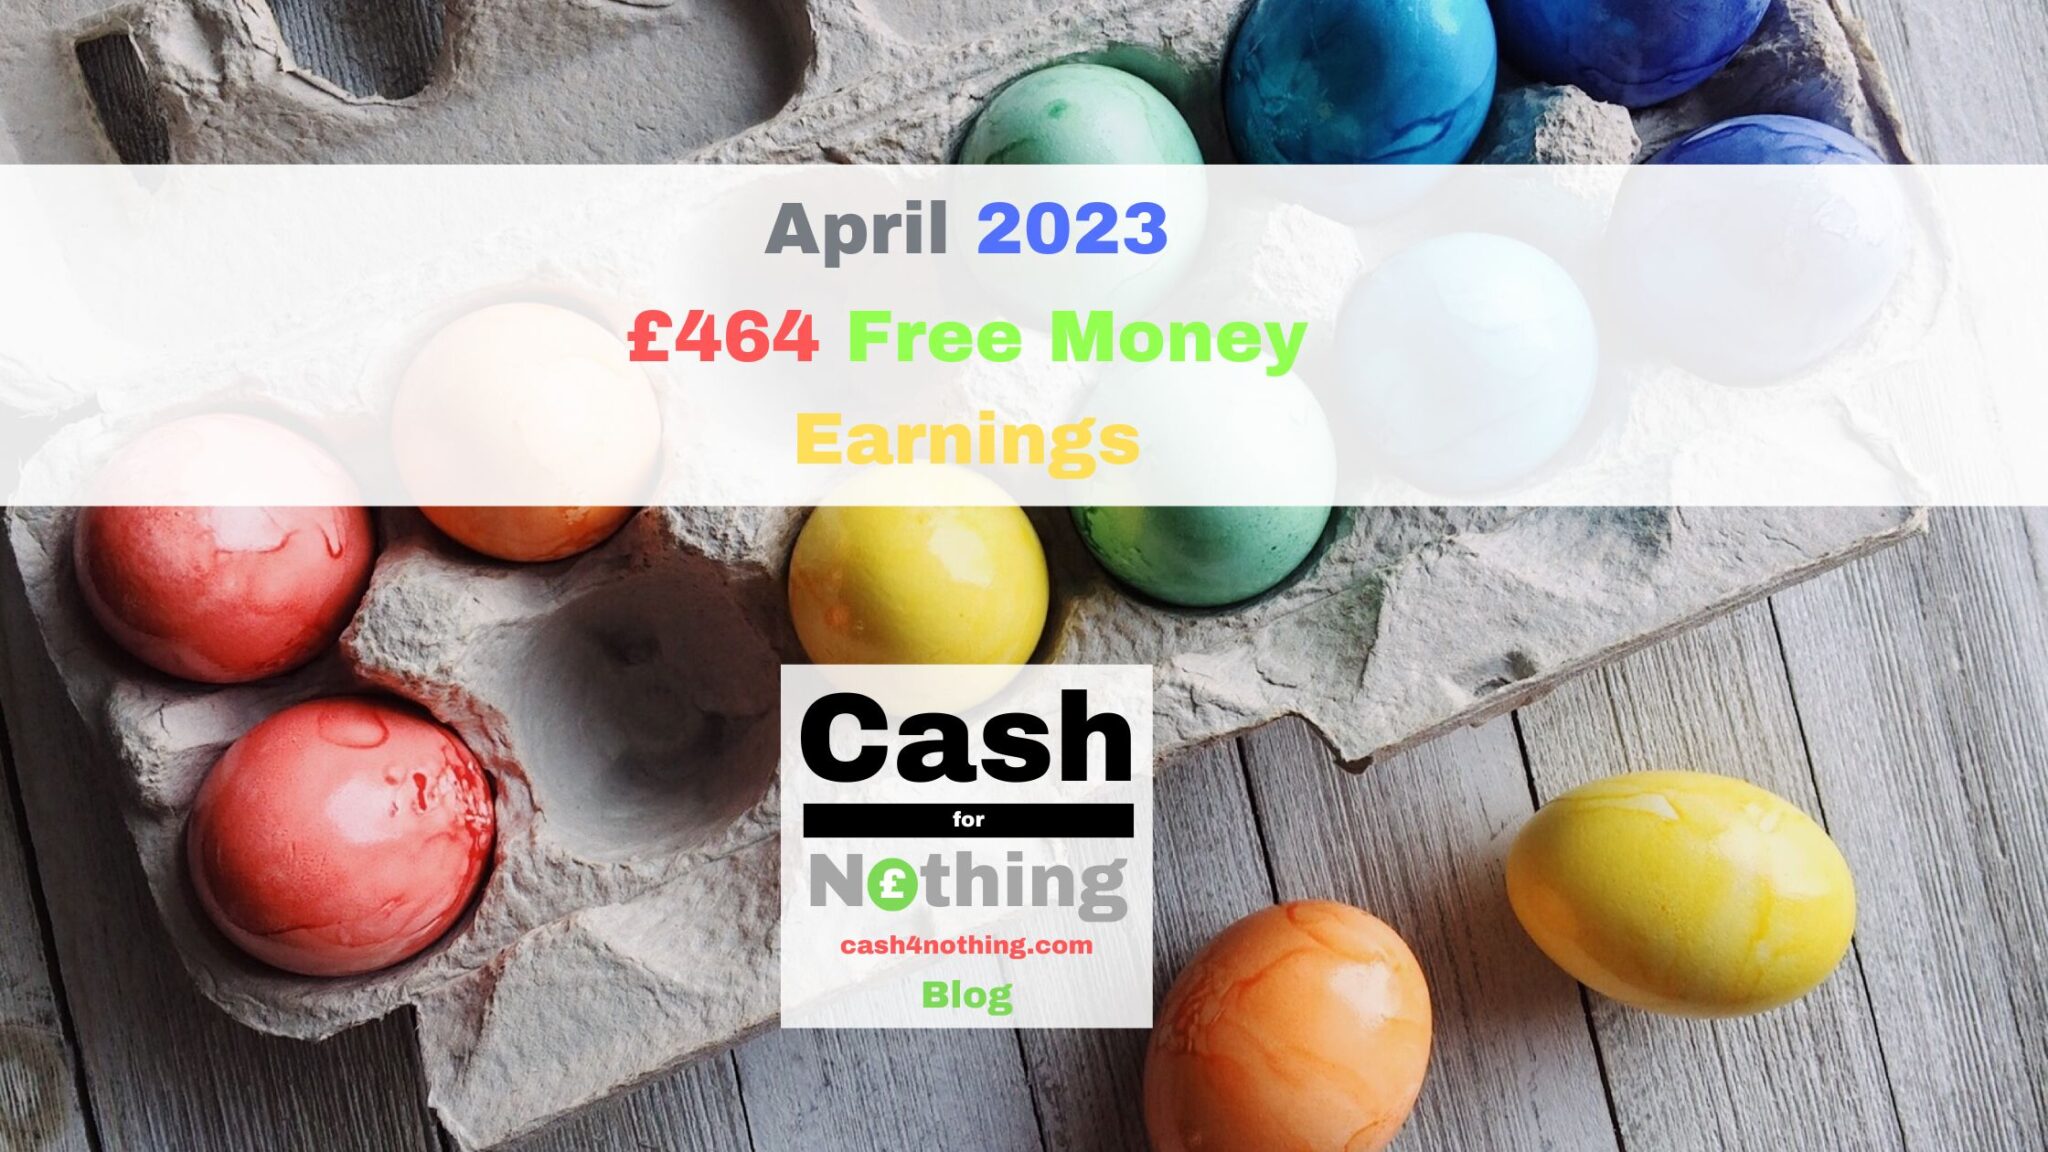 April 2023 Free Cash Earnings Report £464 Free MoneySign up to the Cash4Nothing Newsletter to receive the latest news,free money hints& tips and updates straight into your Inbox.